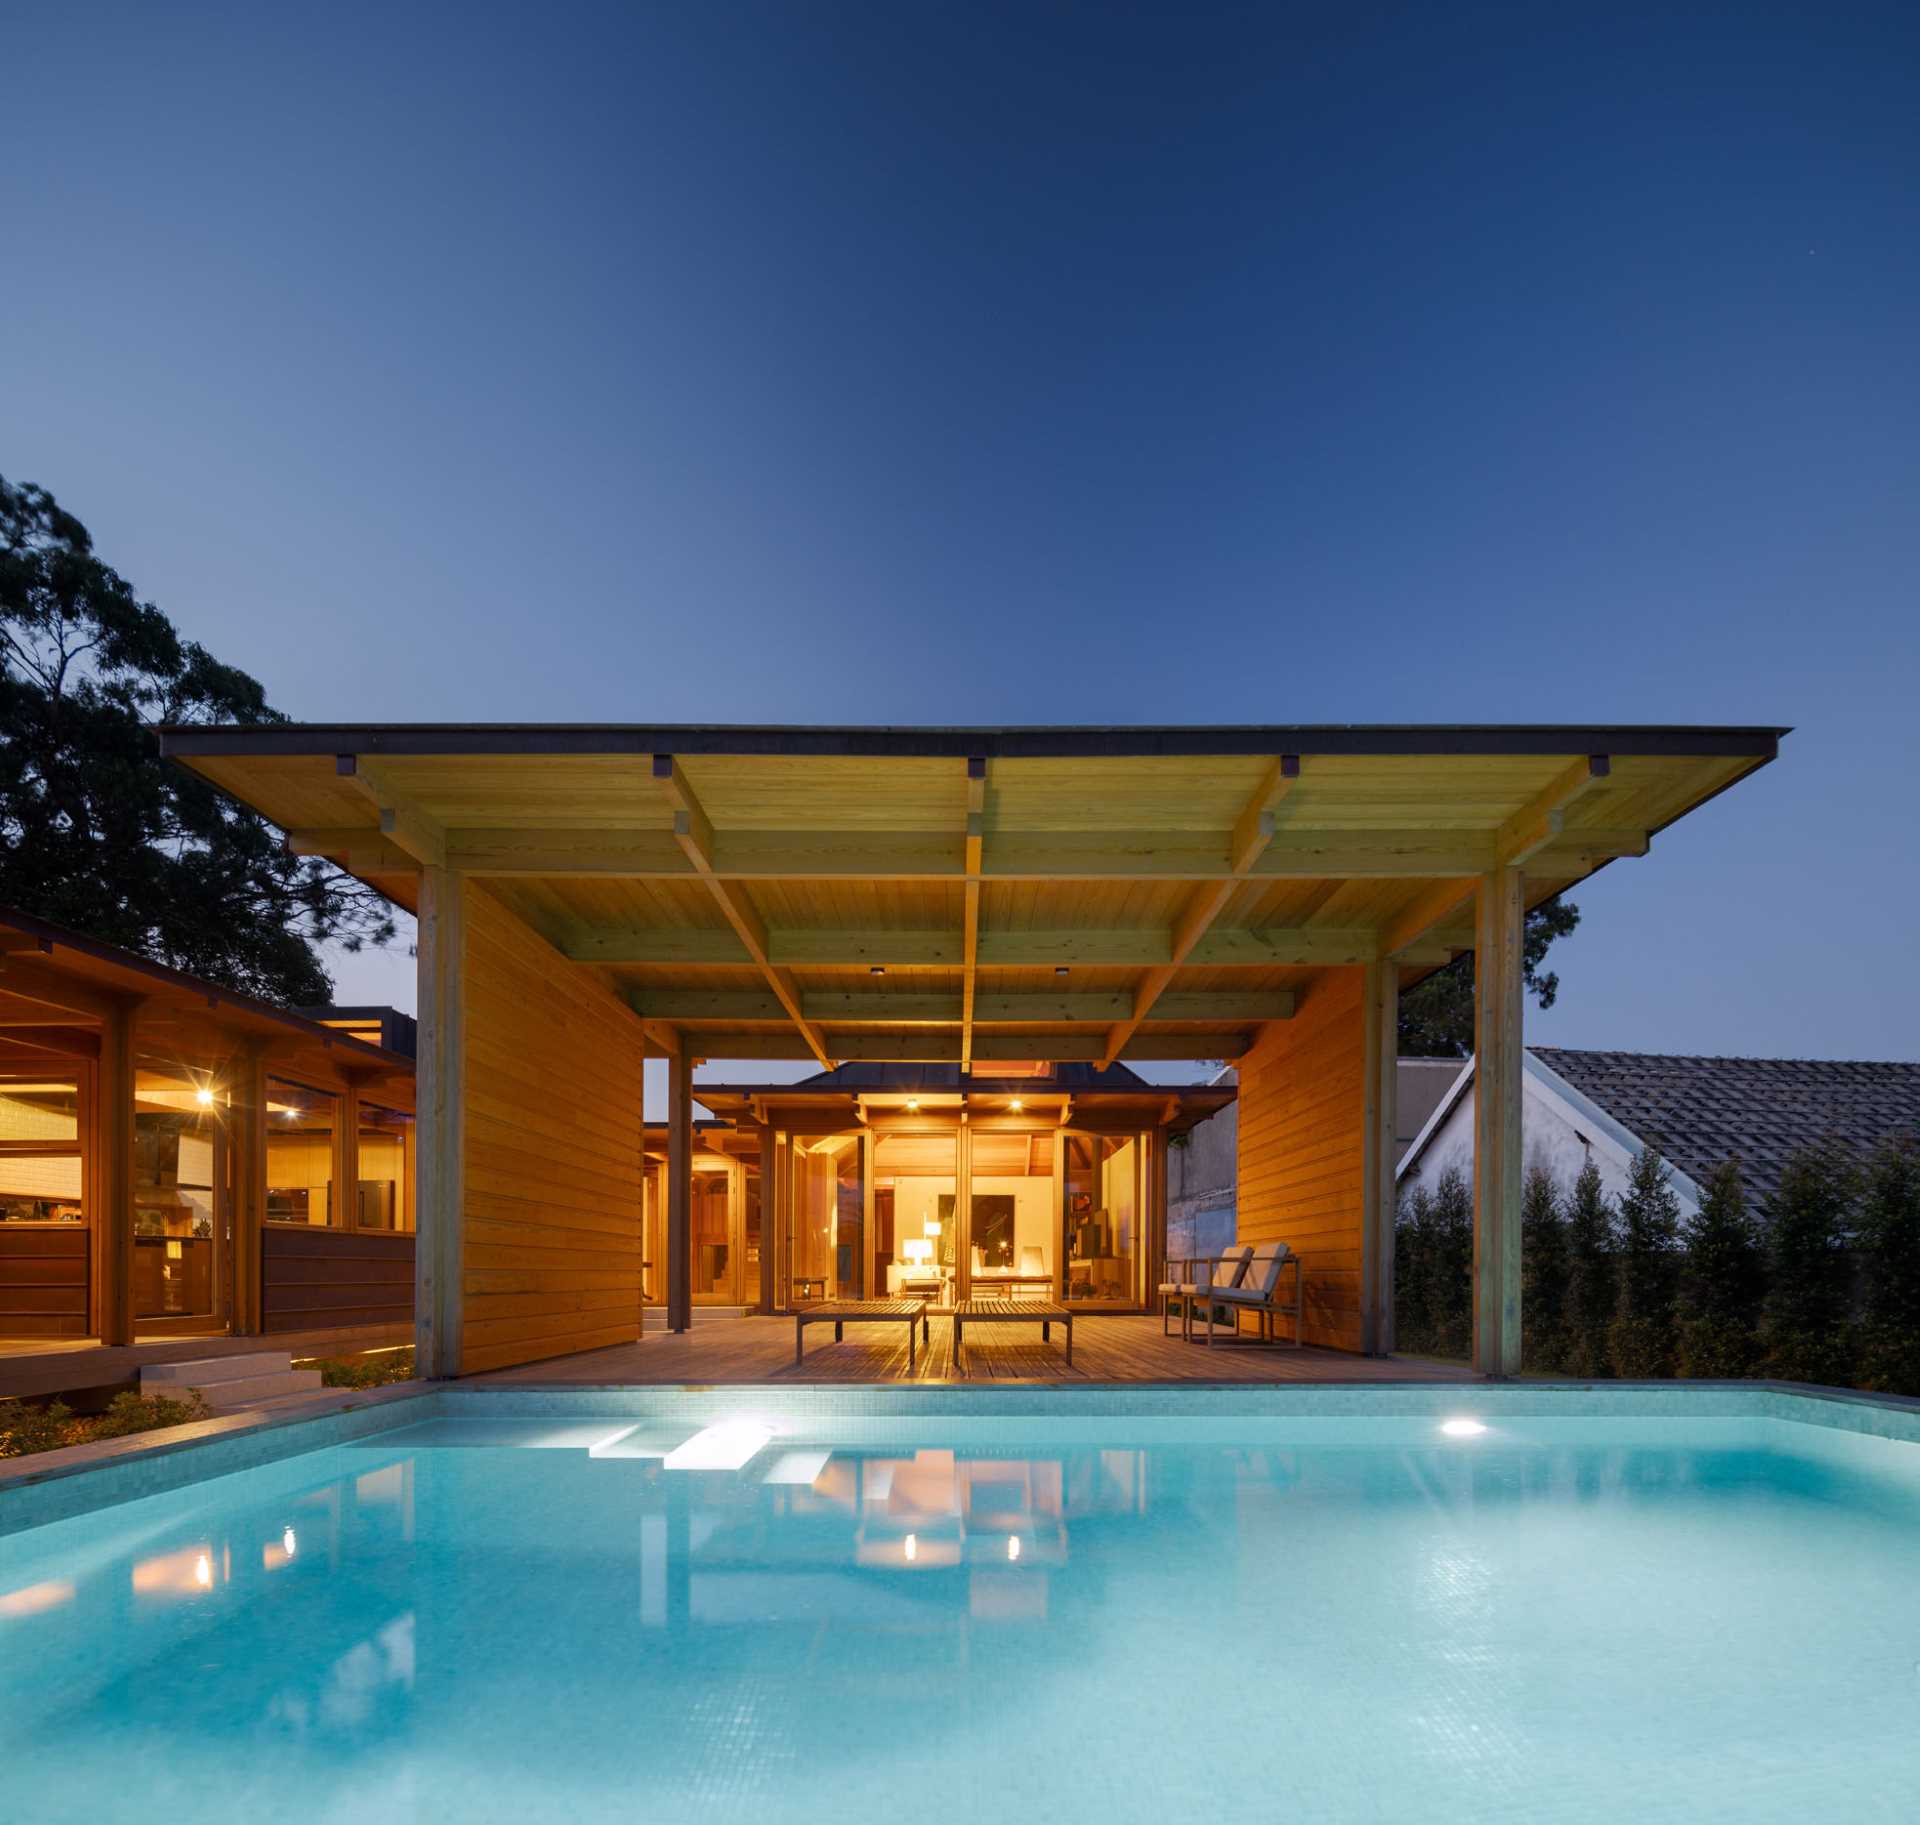 A modern house with a swimming pool and nearby cabana.